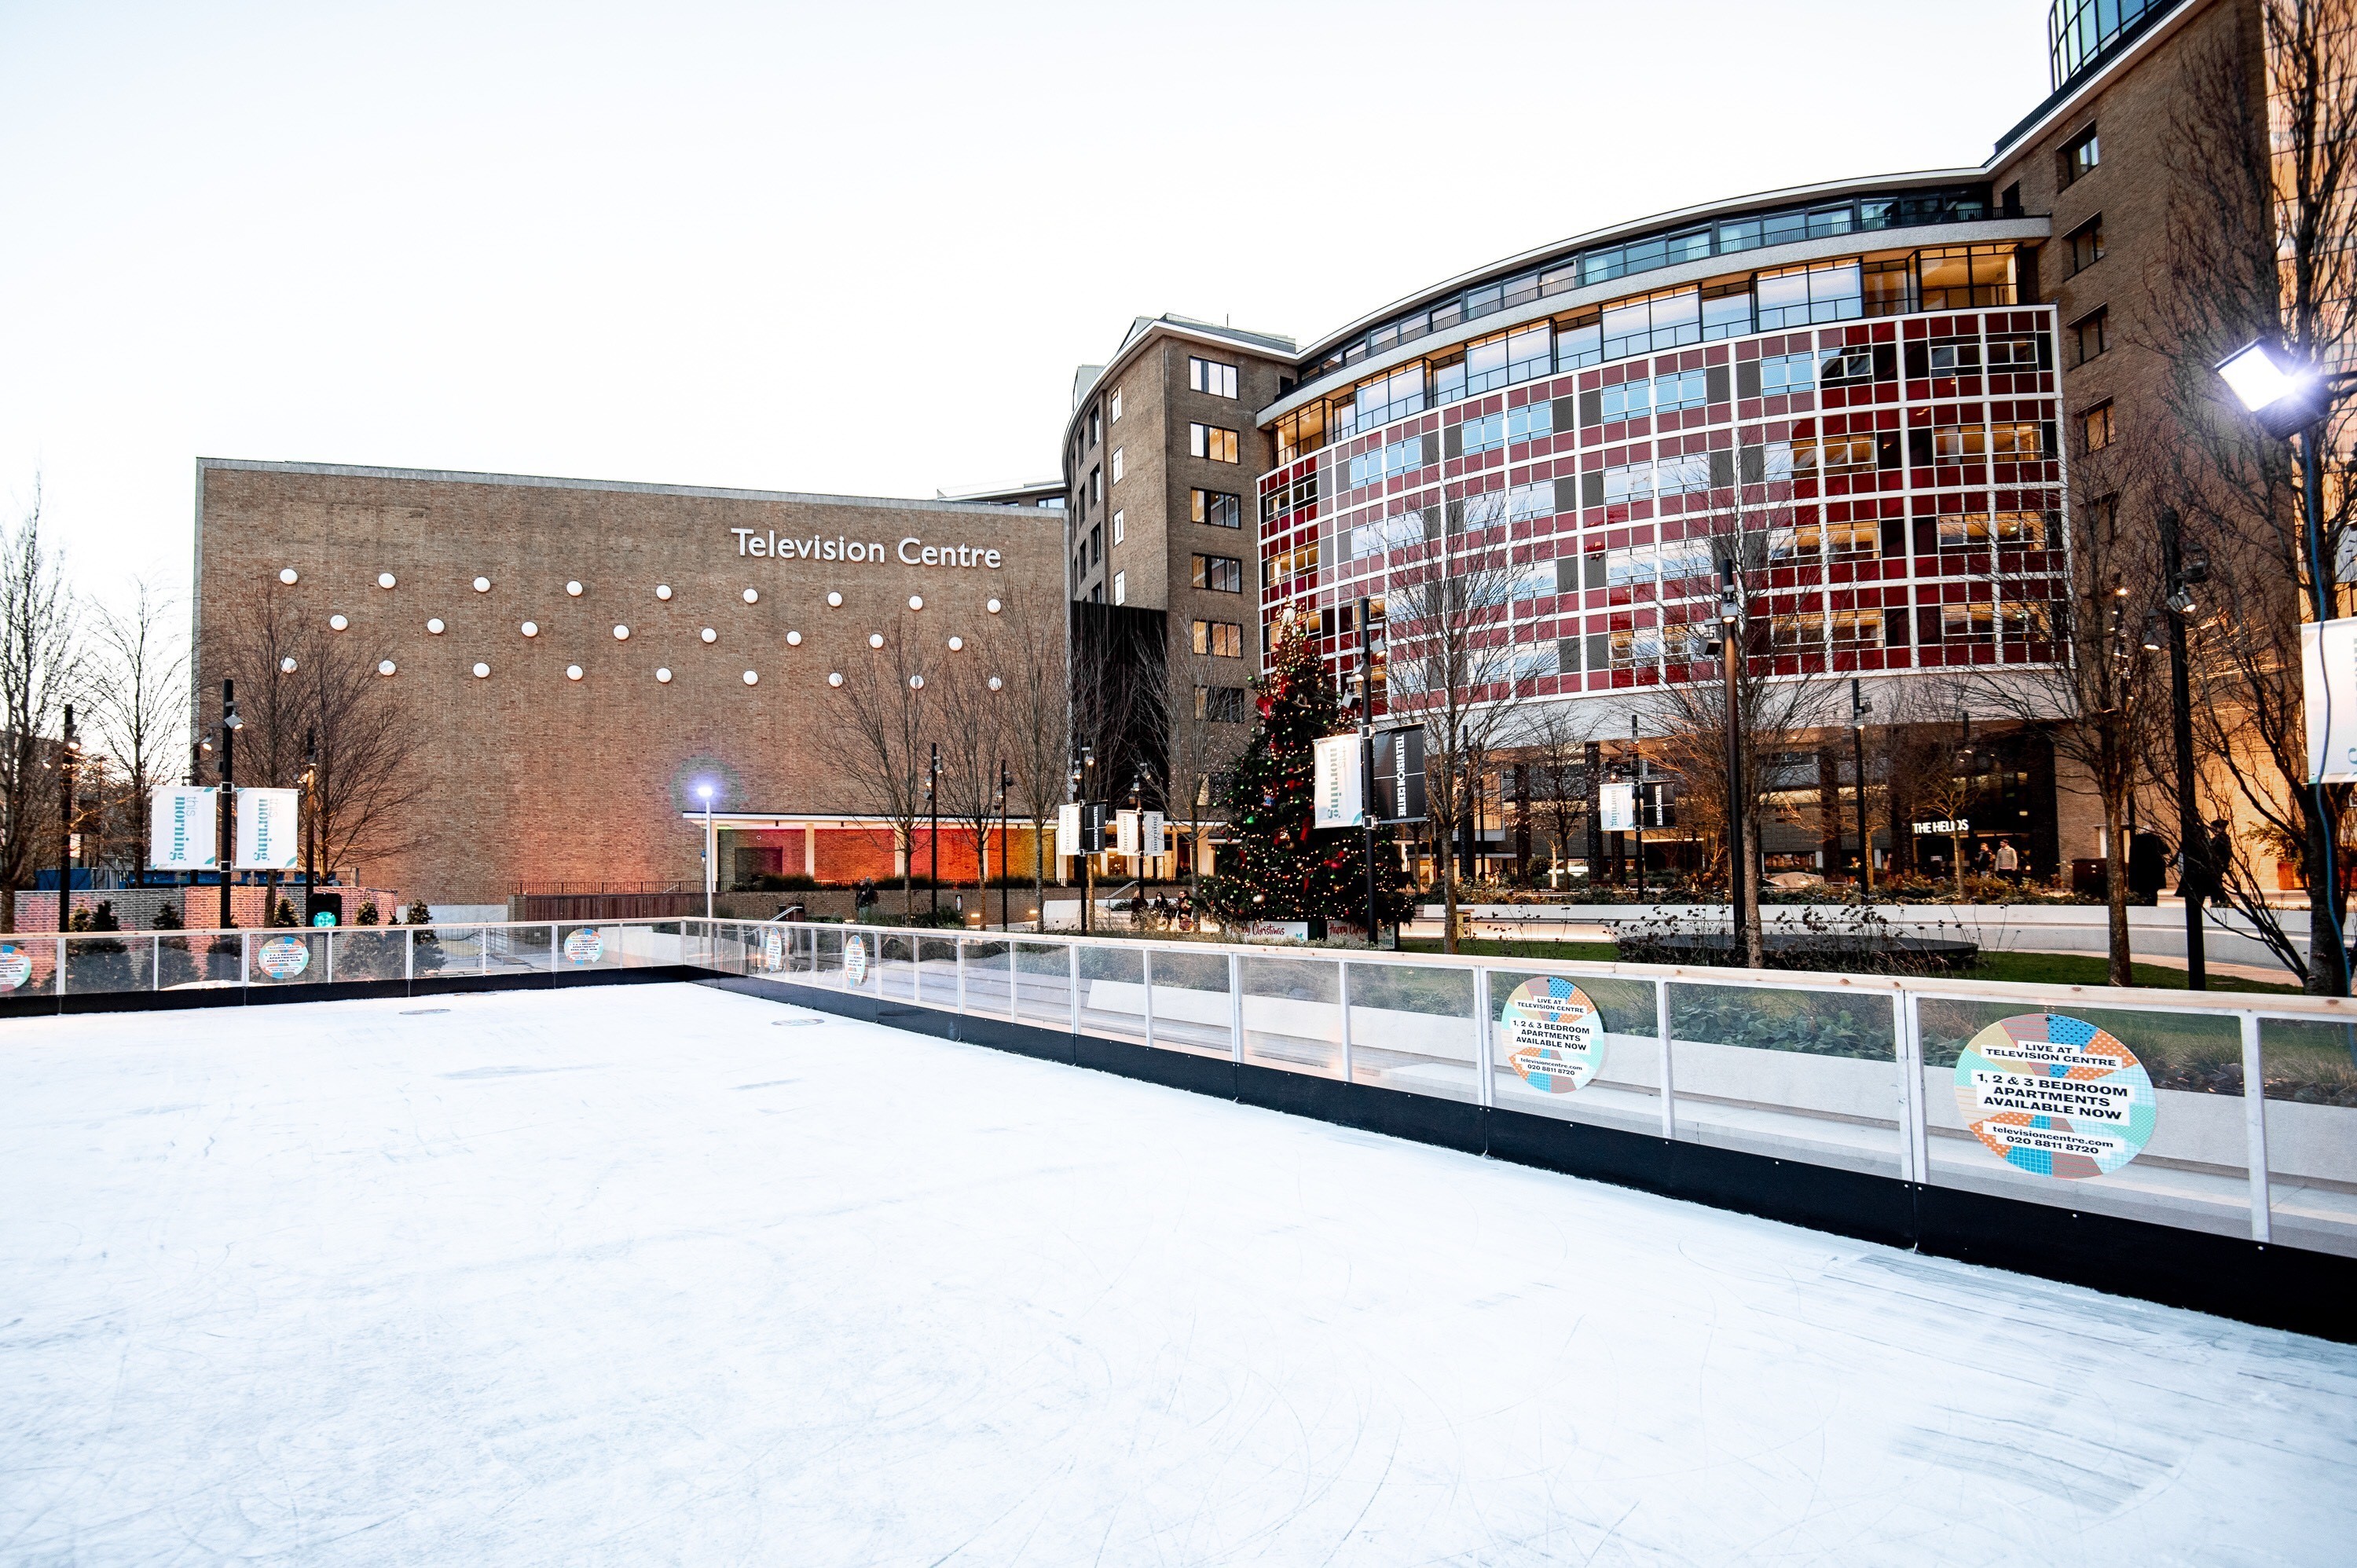 Skate at Television Centre